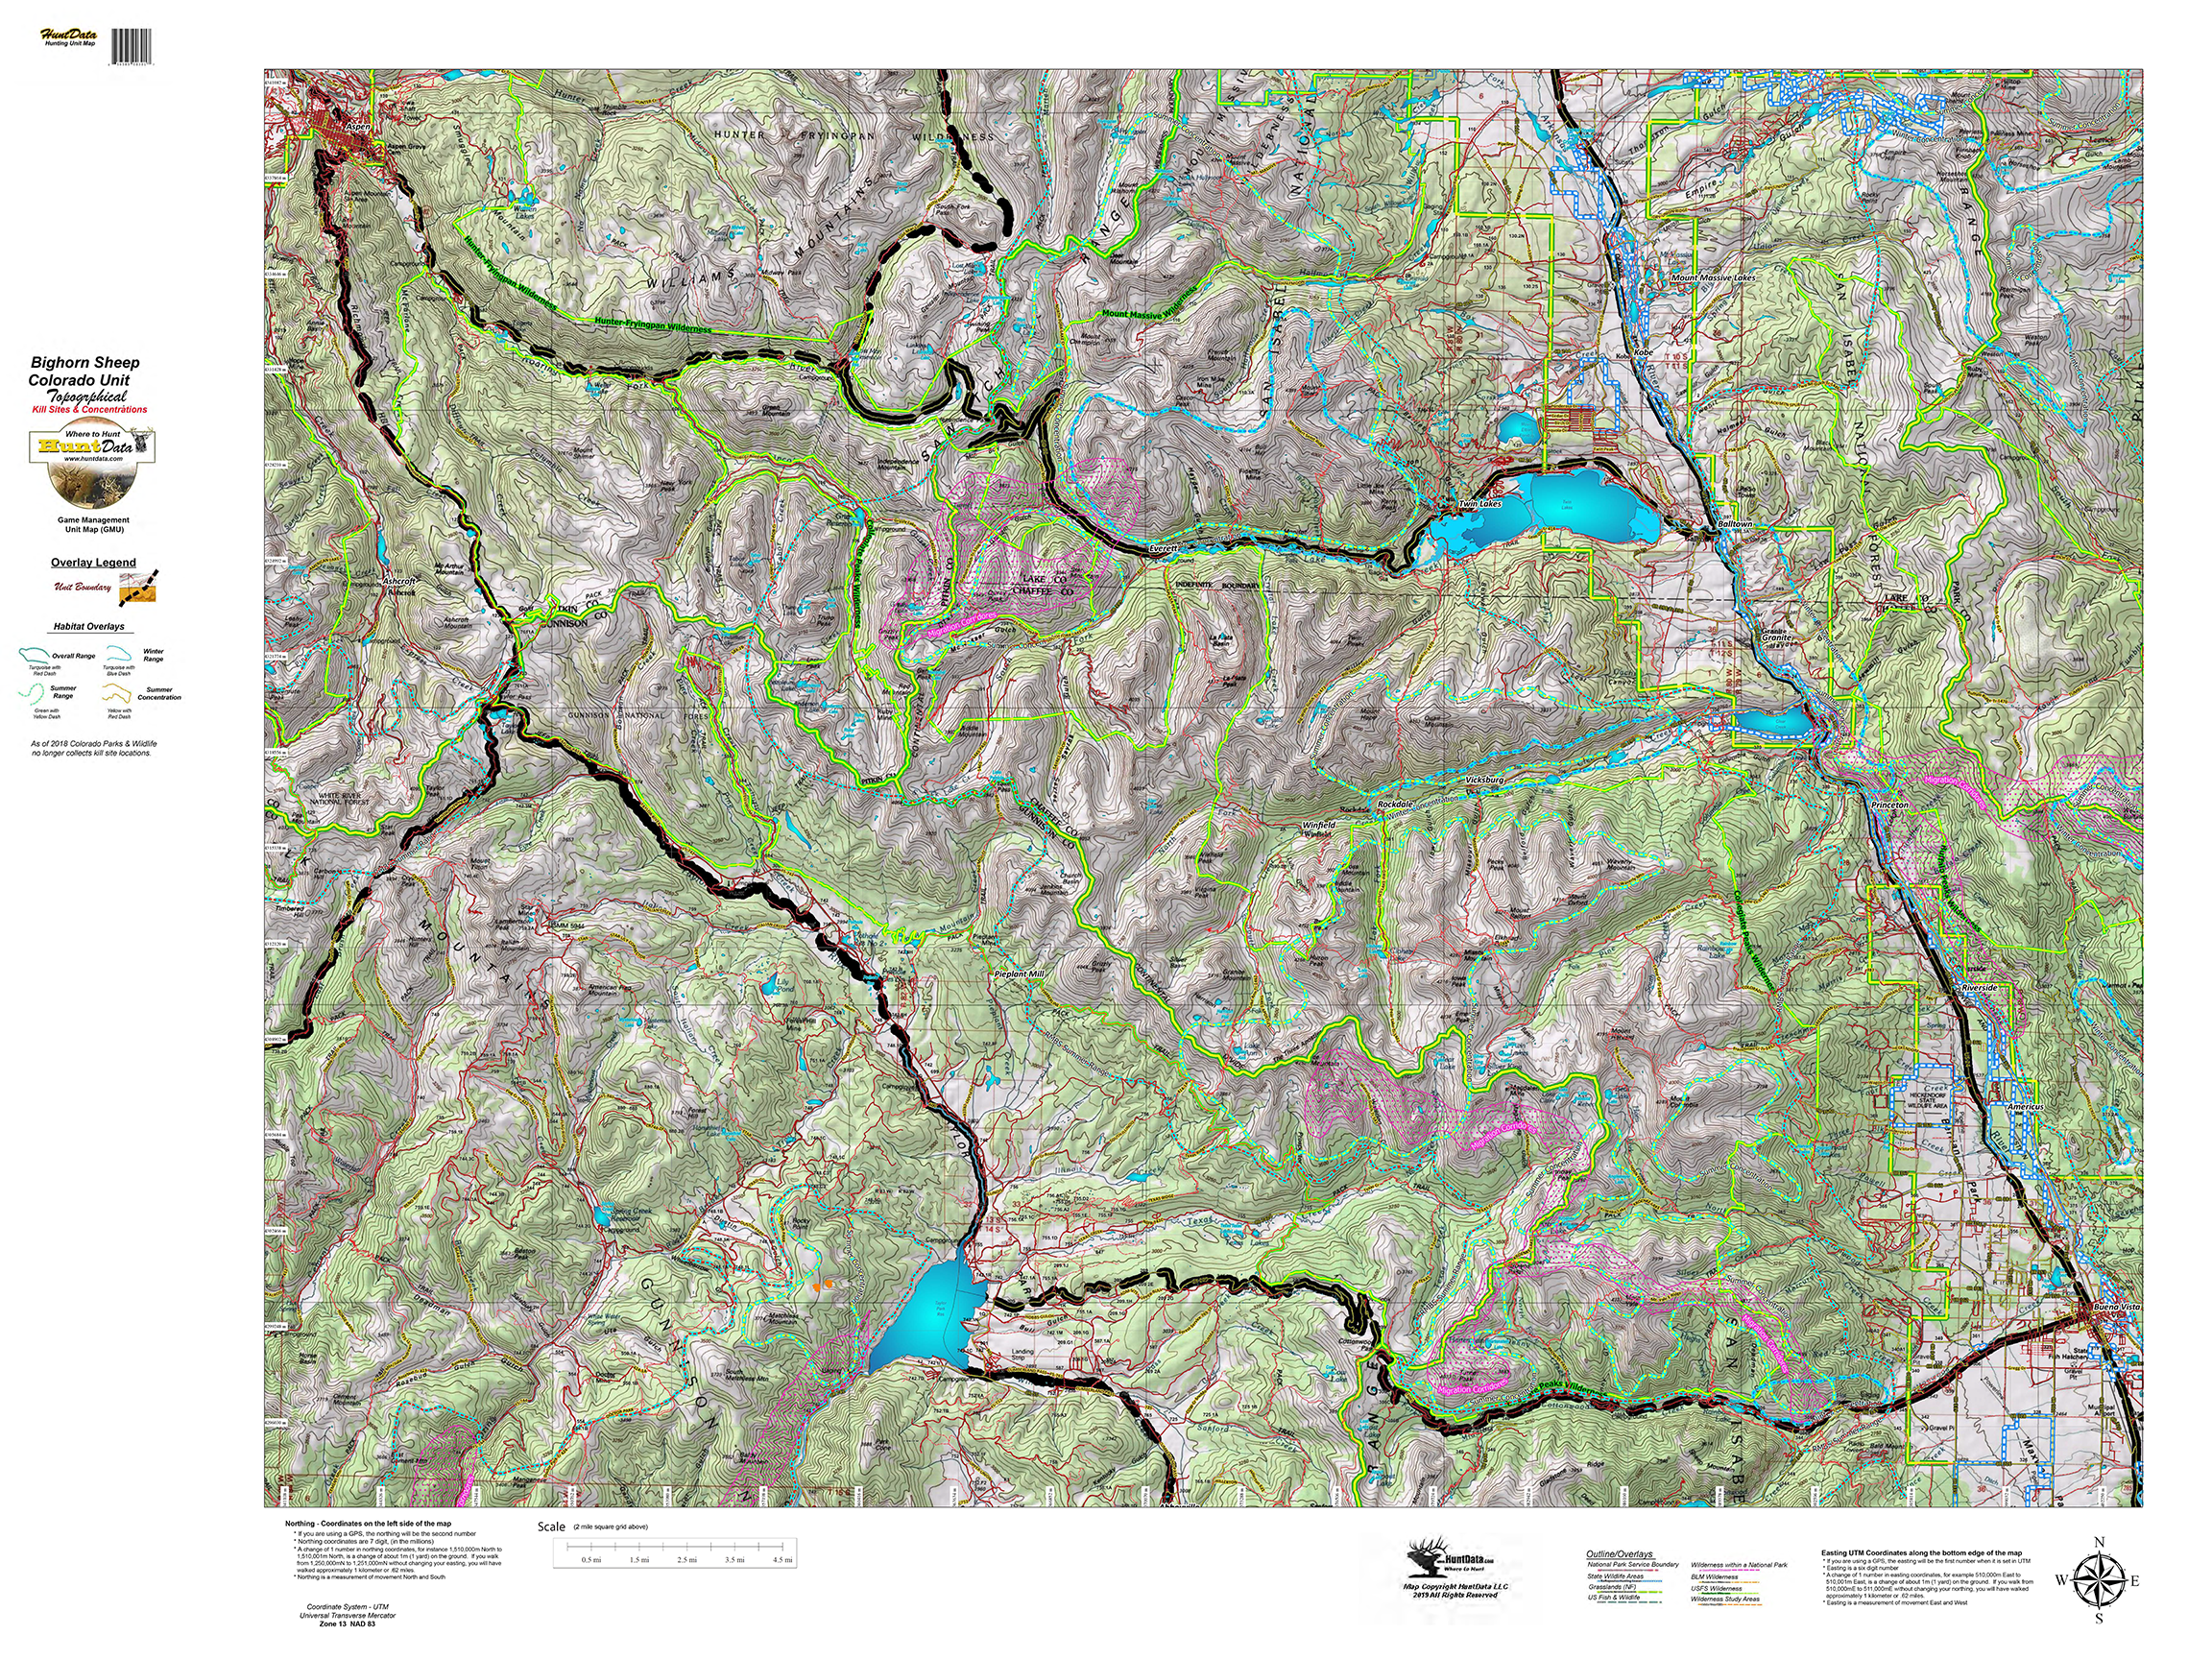 CO Bighorn Topo with Concentrations